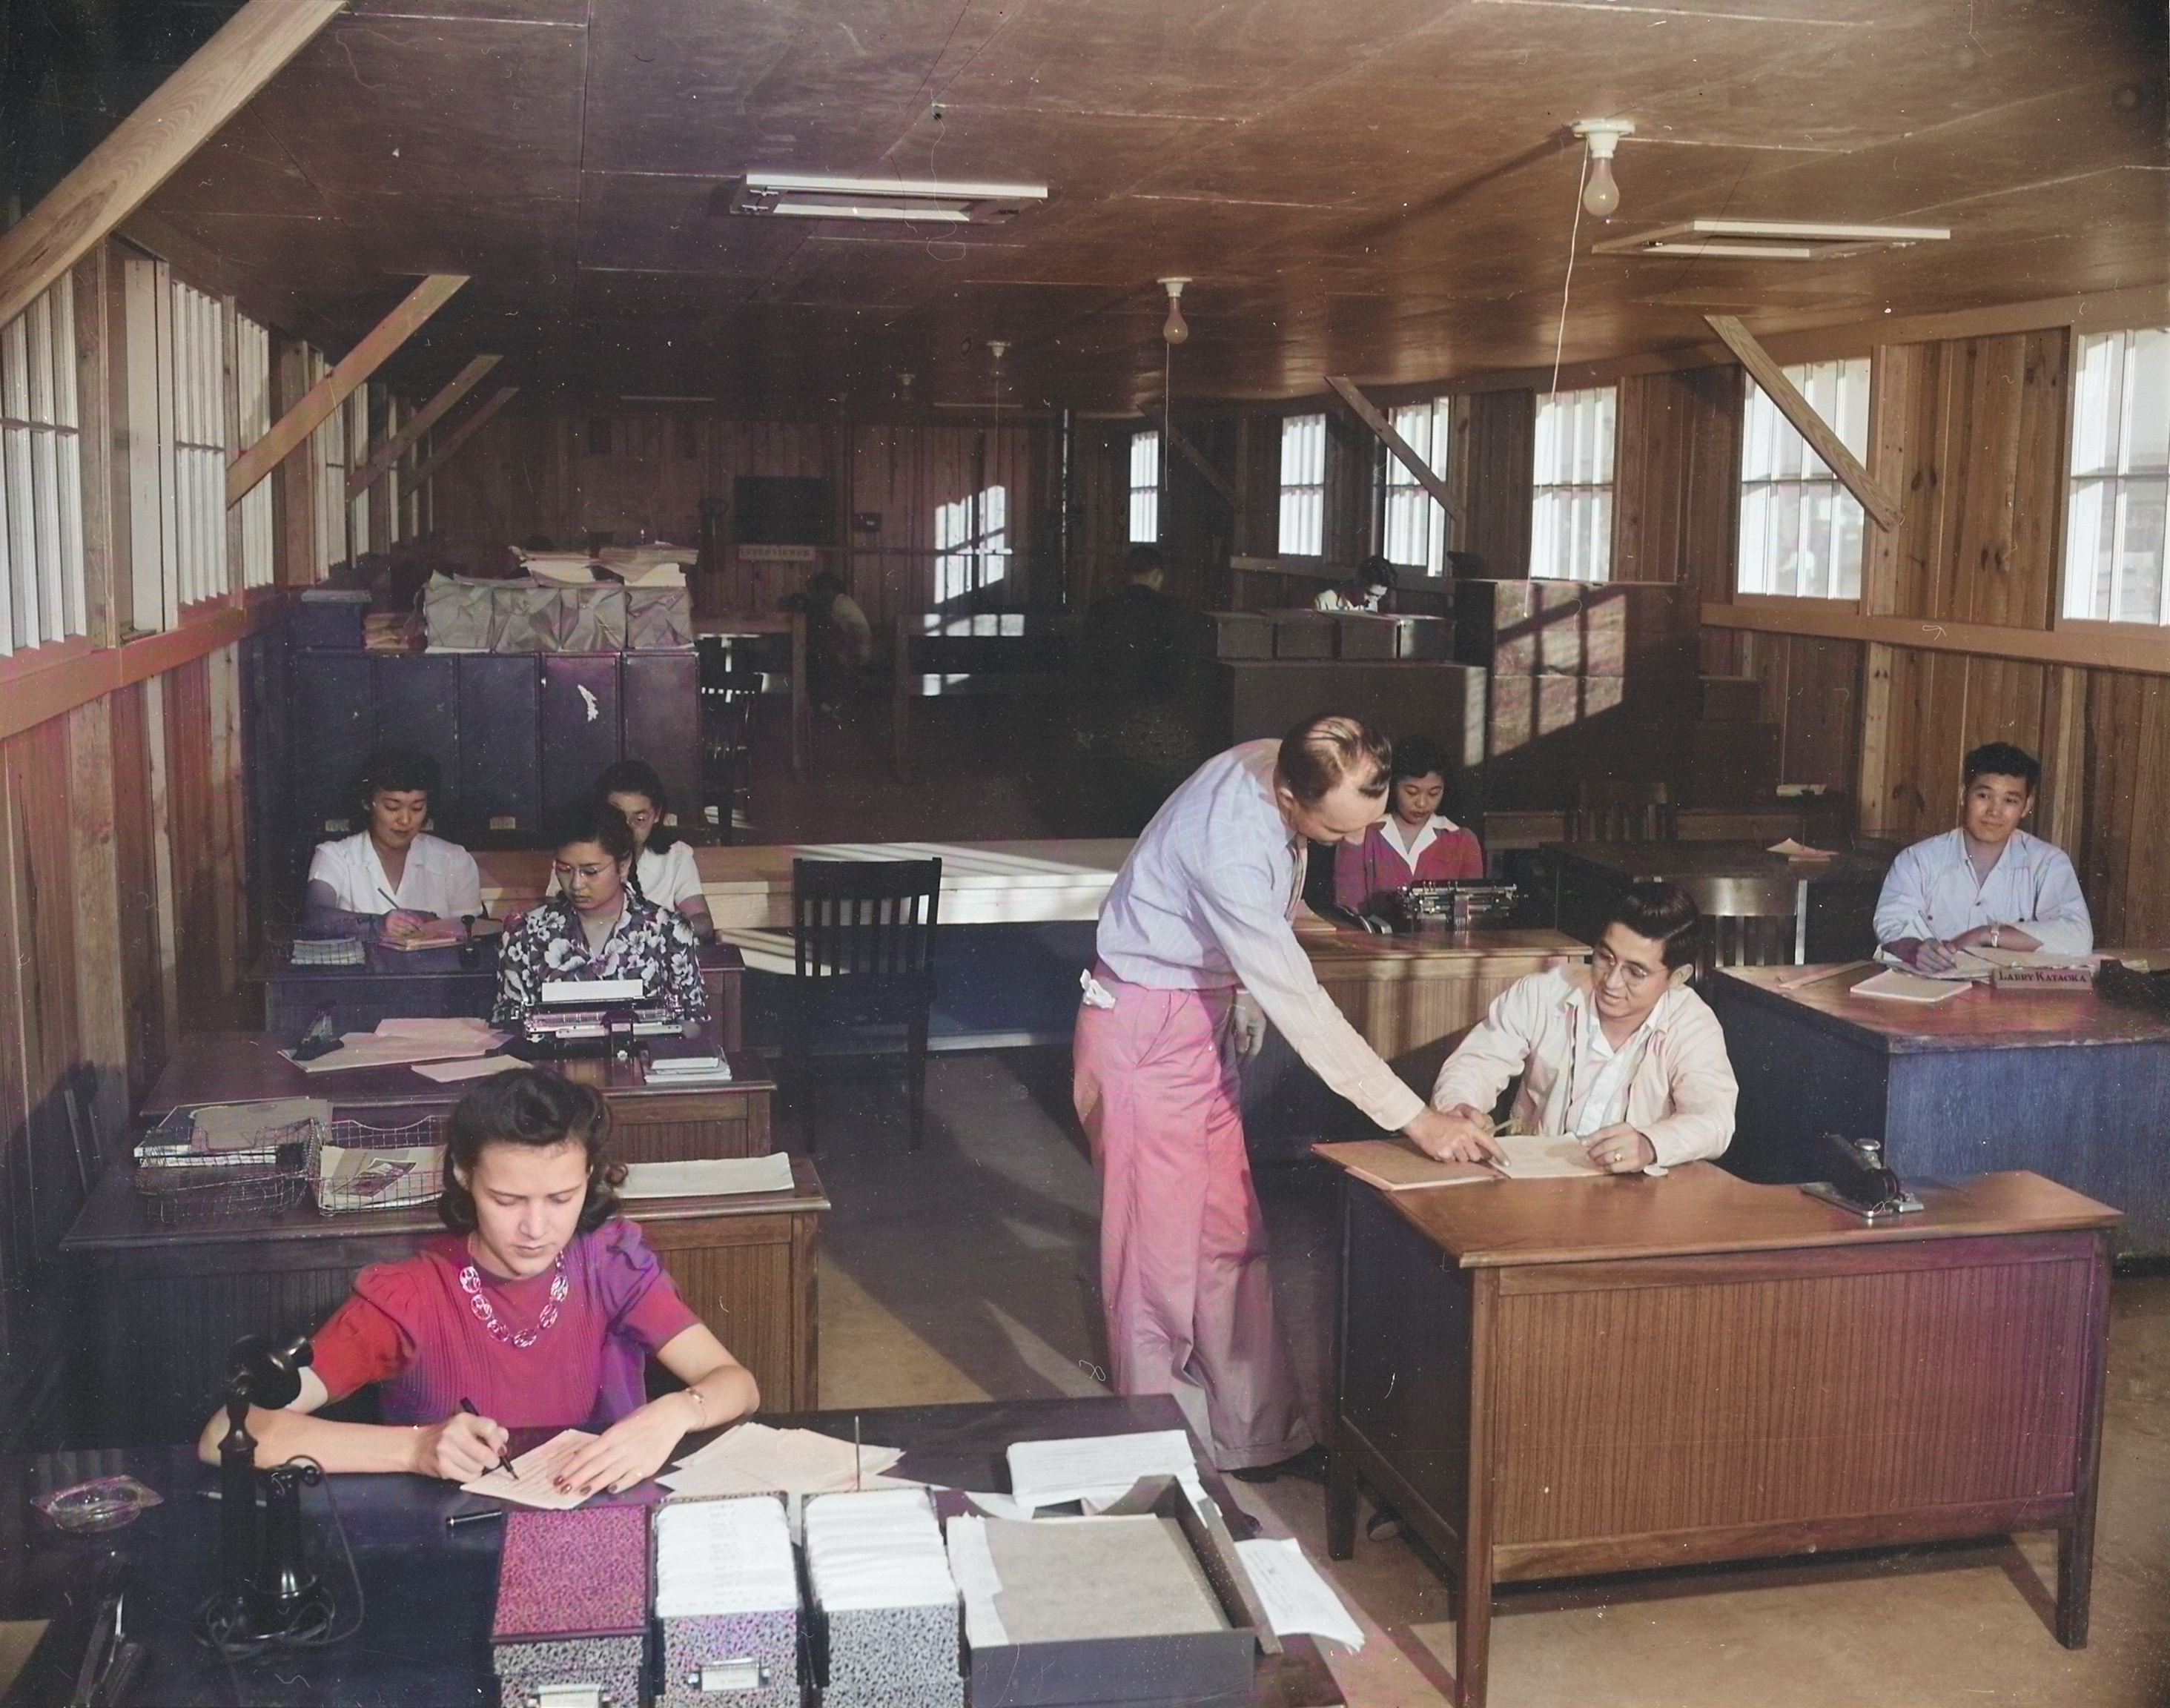 Virginia Shilby (foreground left), John Tucker (center), and other workers at the Housing Department office of Jerome War Relocation Center, Arkansas, United States, 17 Nov 1942 [Colorized by WW2DB]